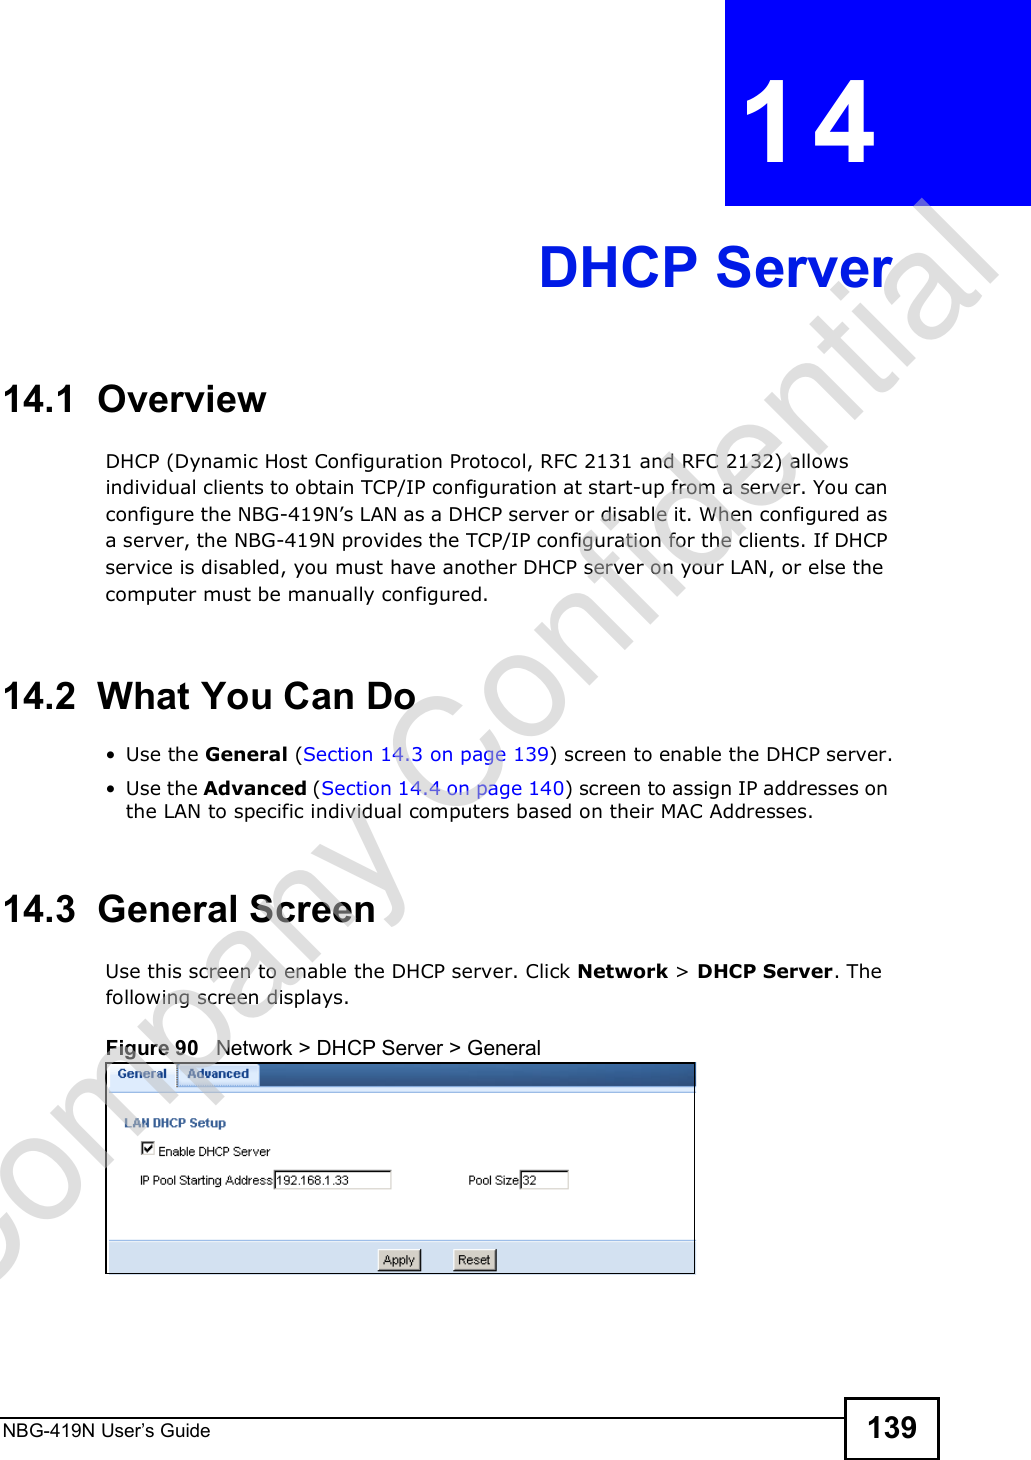 NBG-419N User s Guide 139CHAPTER  14 DHCP Server14.1  OverviewDHCP (Dynamic Host Configuration Protocol, RFC 2131 and RFC 2132) allows individual clients to obtain TCP/IP configuration at start-up from a server. You can configure the NBG-419N!s LAN as a DHCP server or disable it. When configured as a server, the NBG-419N provides the TCP/IP configuration for the clients. If DHCP service is disabled, you must have another DHCP server on your LAN, or else the computer must be manually configured.14.2  What You Can Do Use the General (Section 14.3 on page 139) screen to enable the DHCP server. Use the Advanced (Section 14.4 on page 140) screen to assign IP addresses on the LAN to specific individual computers based on their MAC Addresses.14.3  General ScreenUse this screen to enable the DHCP server. Click Network &gt; DHCP Server. The following screen displays.Figure 90   Network &gt; DHCP Server &gt; General   Company Confidential